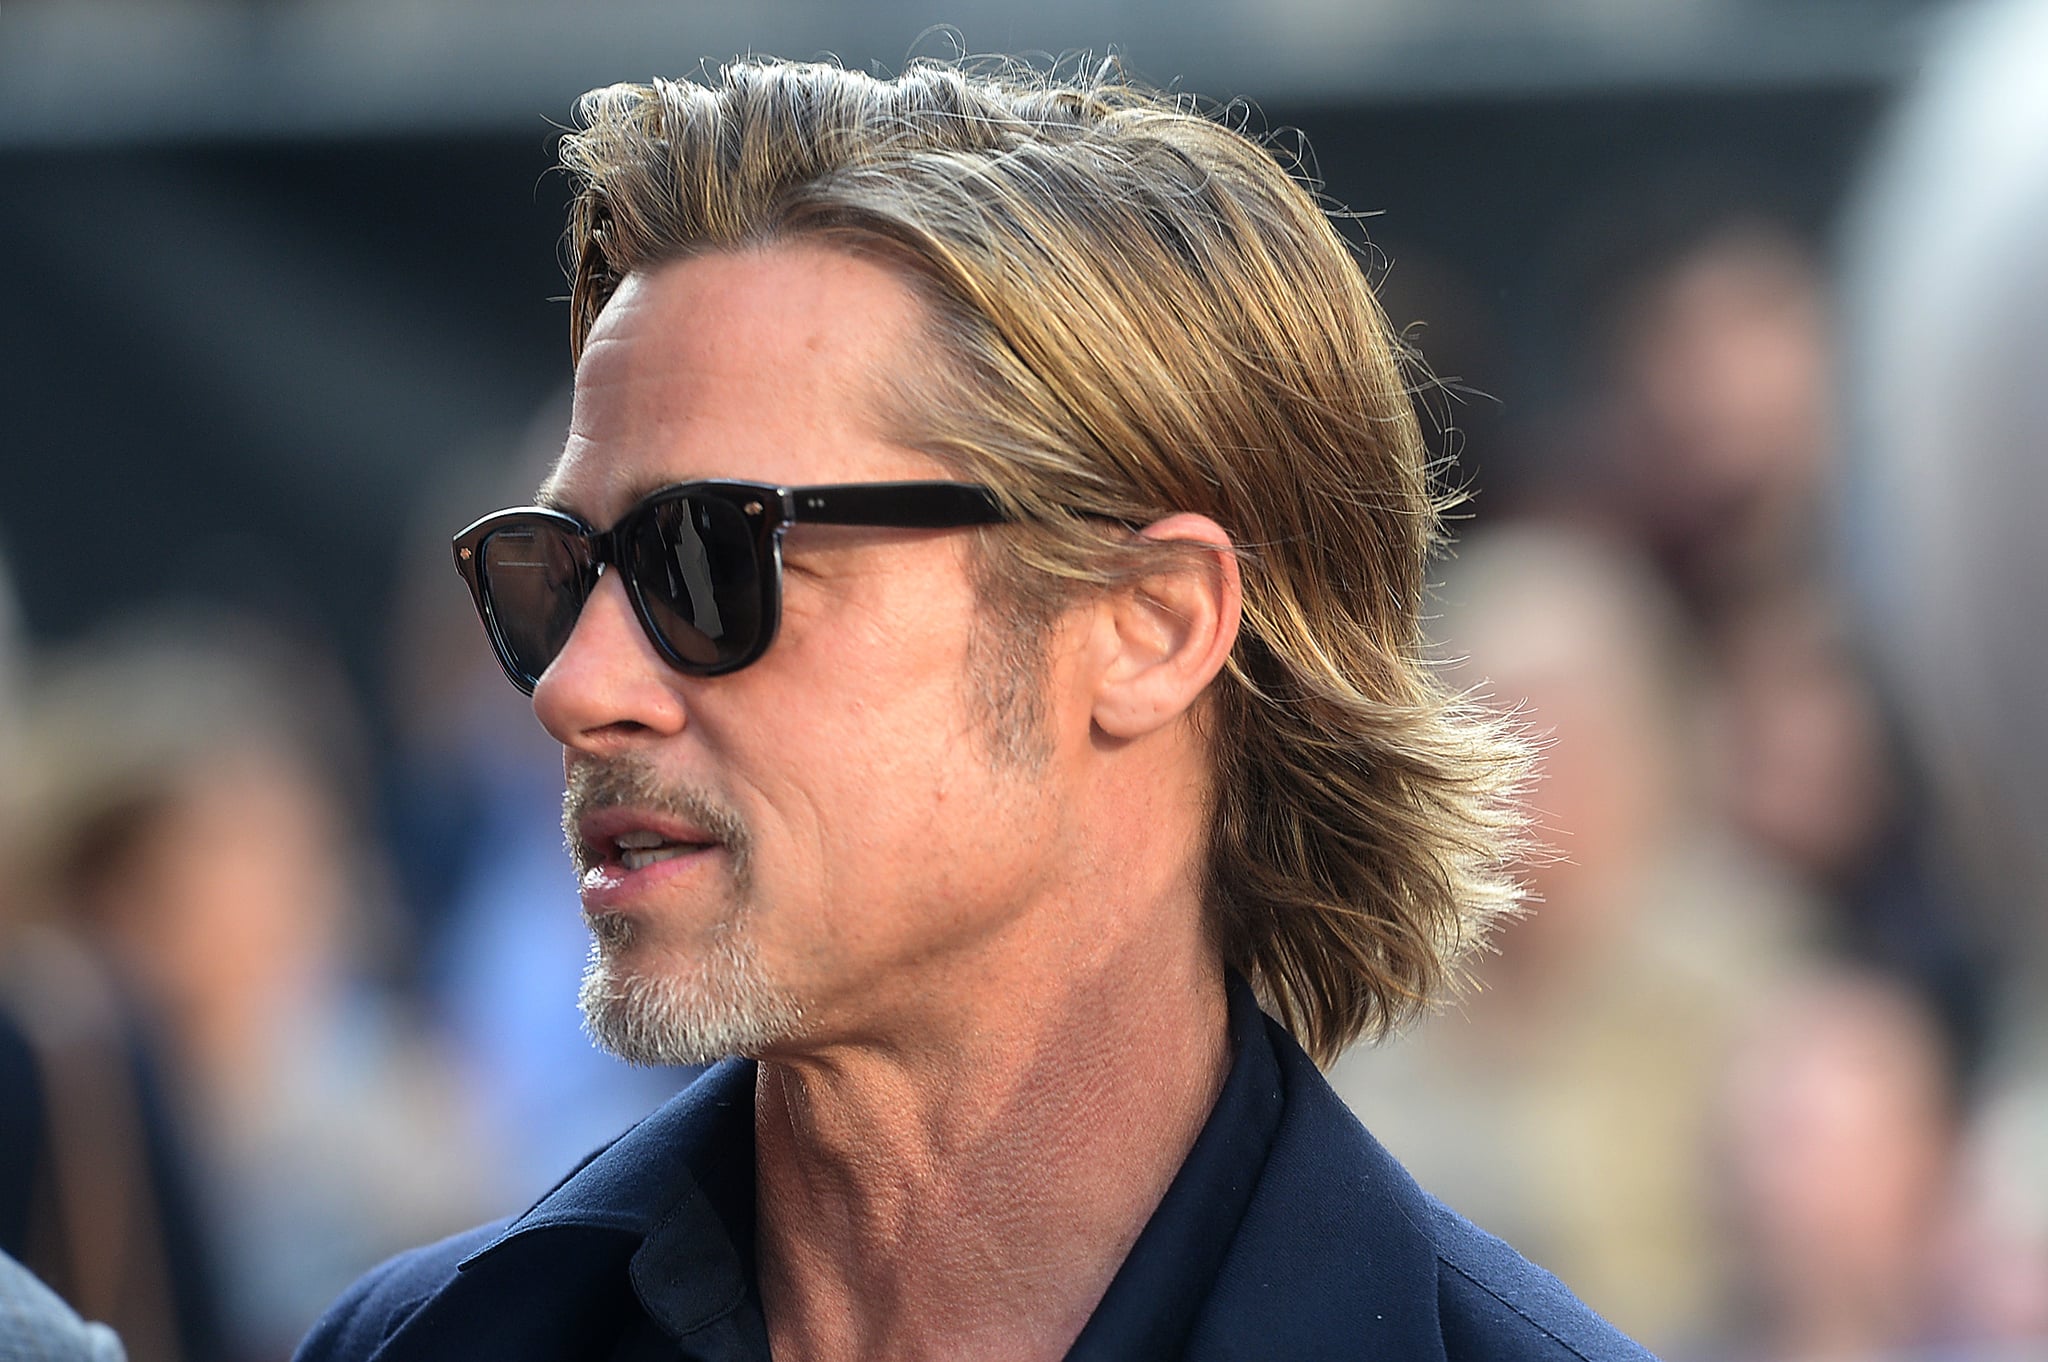 Brad Pitt's short hair in "Once Upon a Time in Hollywood" - wide 6